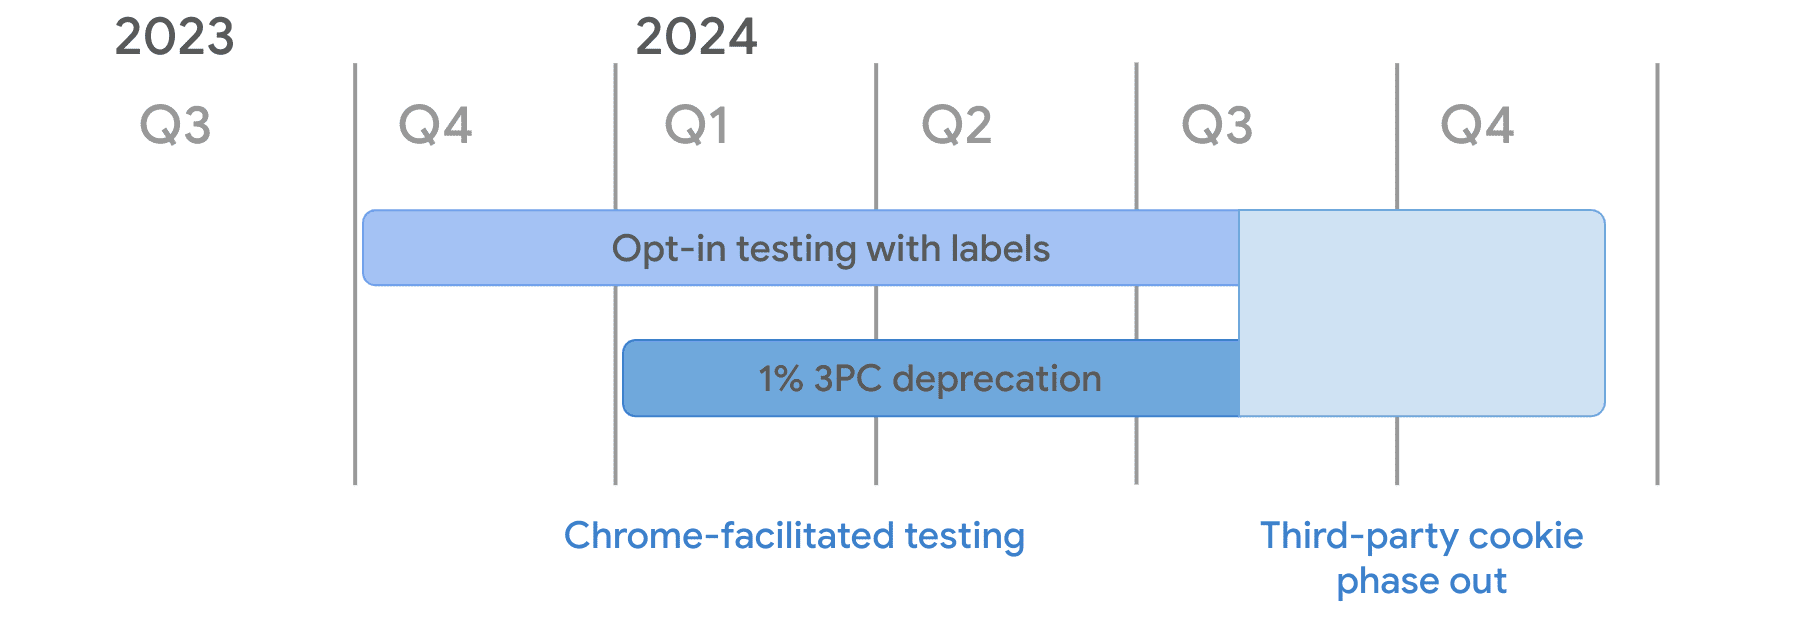 As part of Chrome-facilitated testing, the opt-in testing with labels mode starts in Q4 2023 and the 1% 3PC deprecation mode starts from January 4th, 2024. Both continue through to mid-Q3 2024 when the third-party cookie phaseout starts.